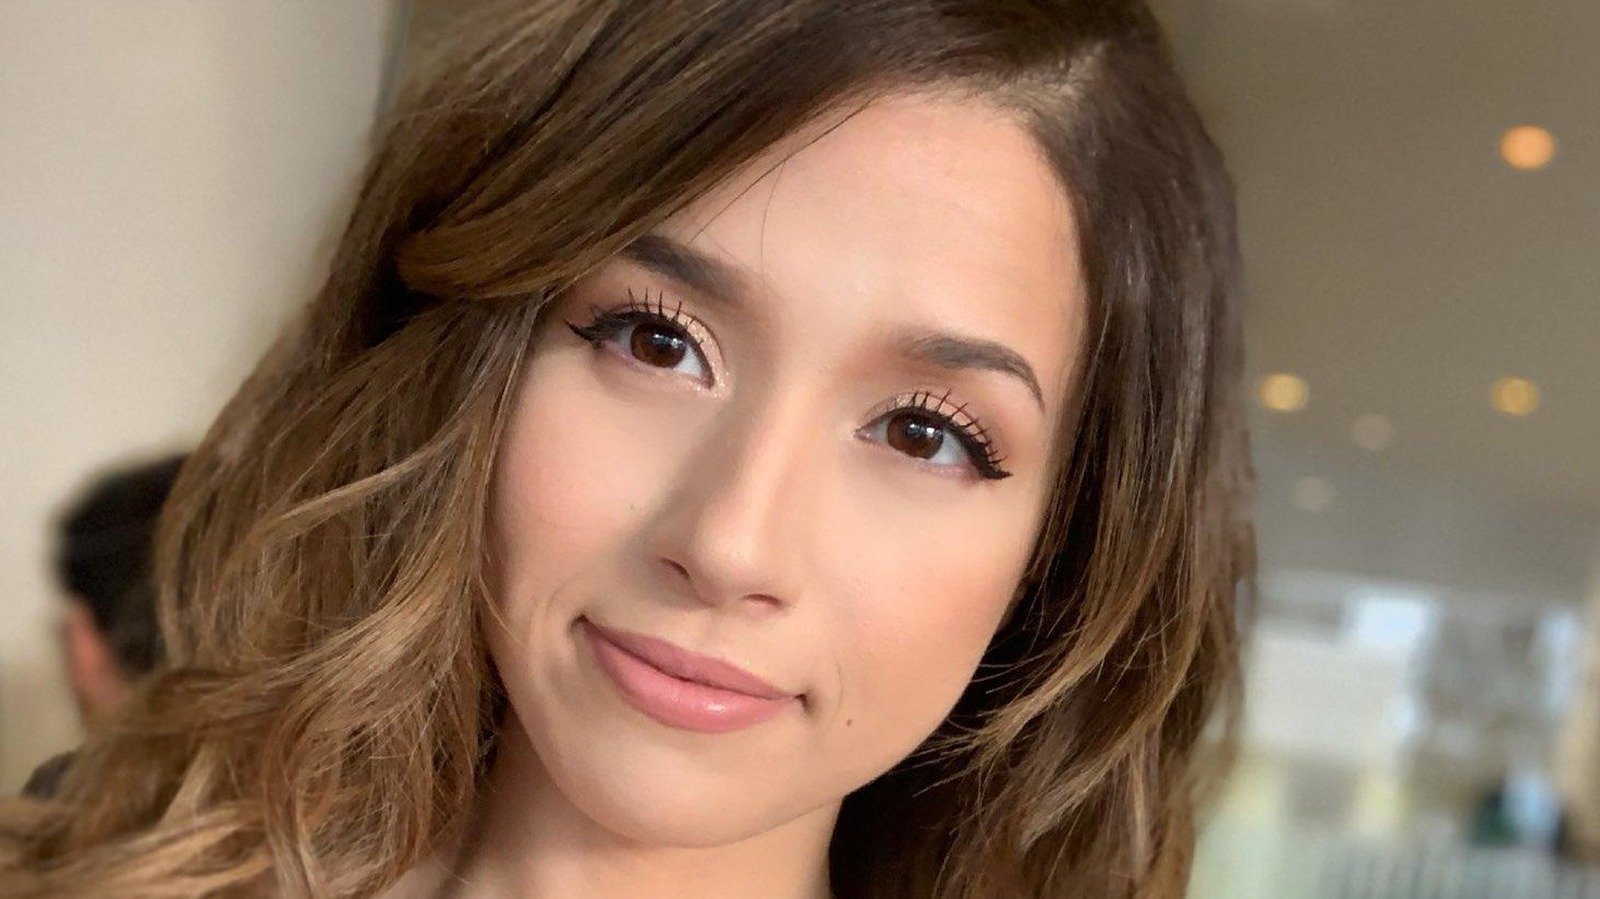 The Bizarre Story Behind Pokimane's Rise To Fame - SVG